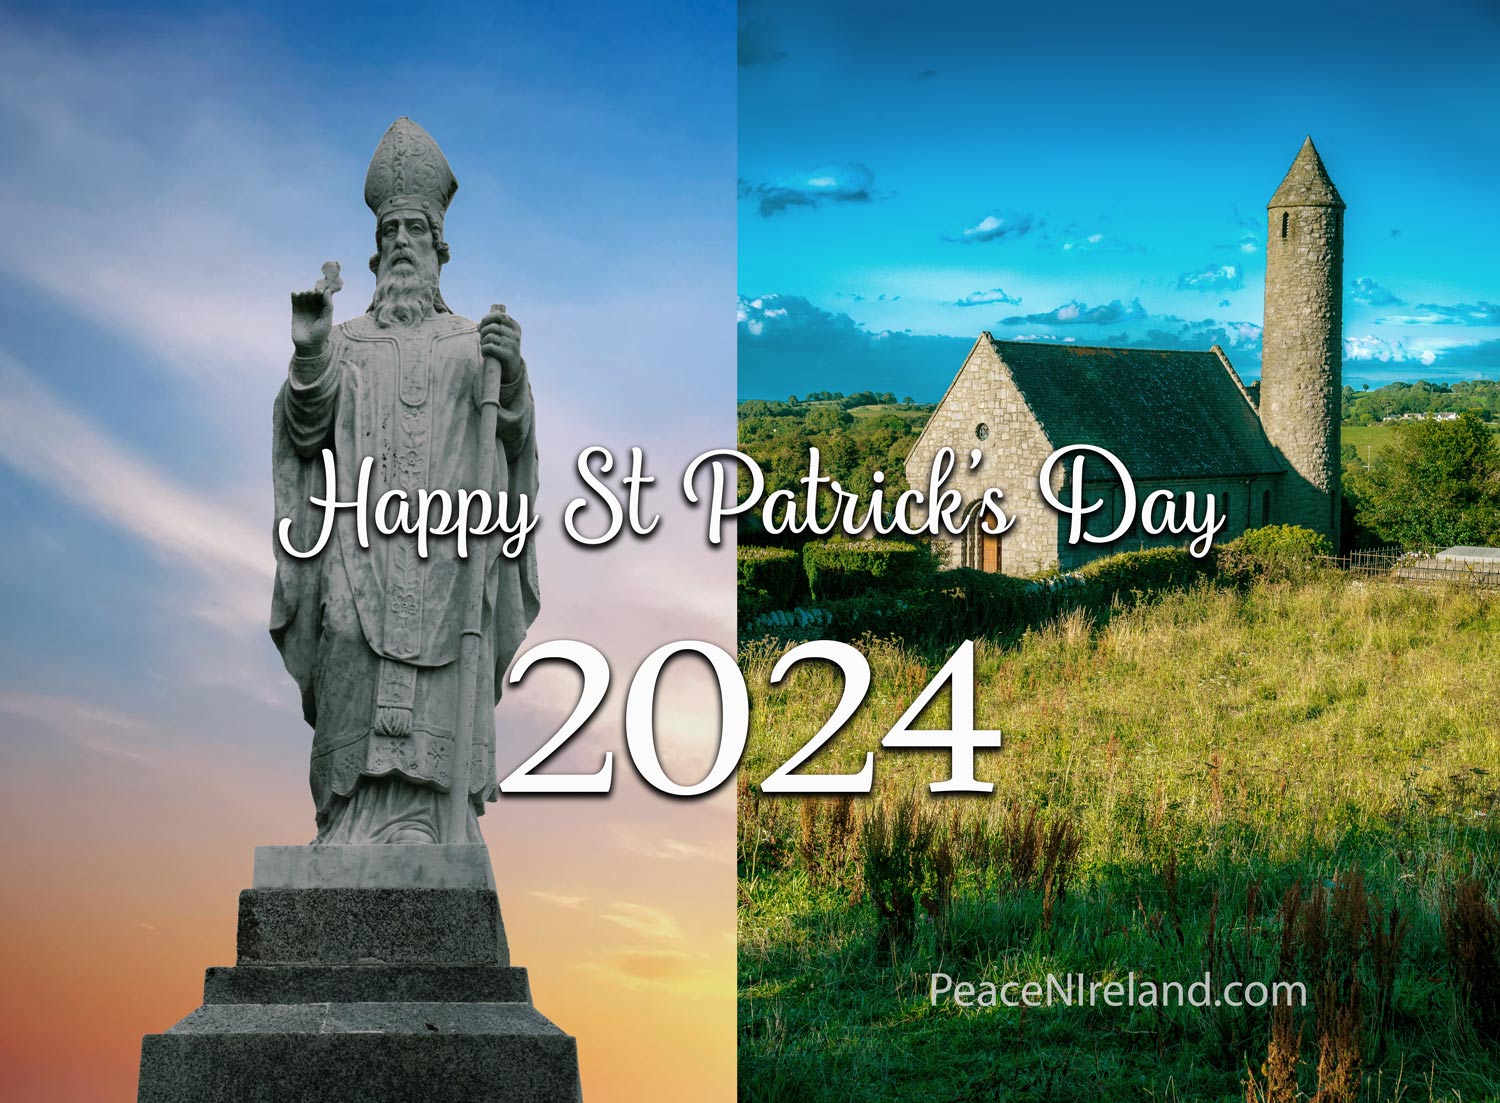 The image on the left is the statue of St Patrick at the Hill of Tara in County Meath, Ireland. On the right is the church at Saul in County Down, very close to Downpatrick, which stands on the site of where Patrick established the first Christian Church in Ireland in a simple barn in 432AD. This church was build in 1932 and is still used today as a place of worship.